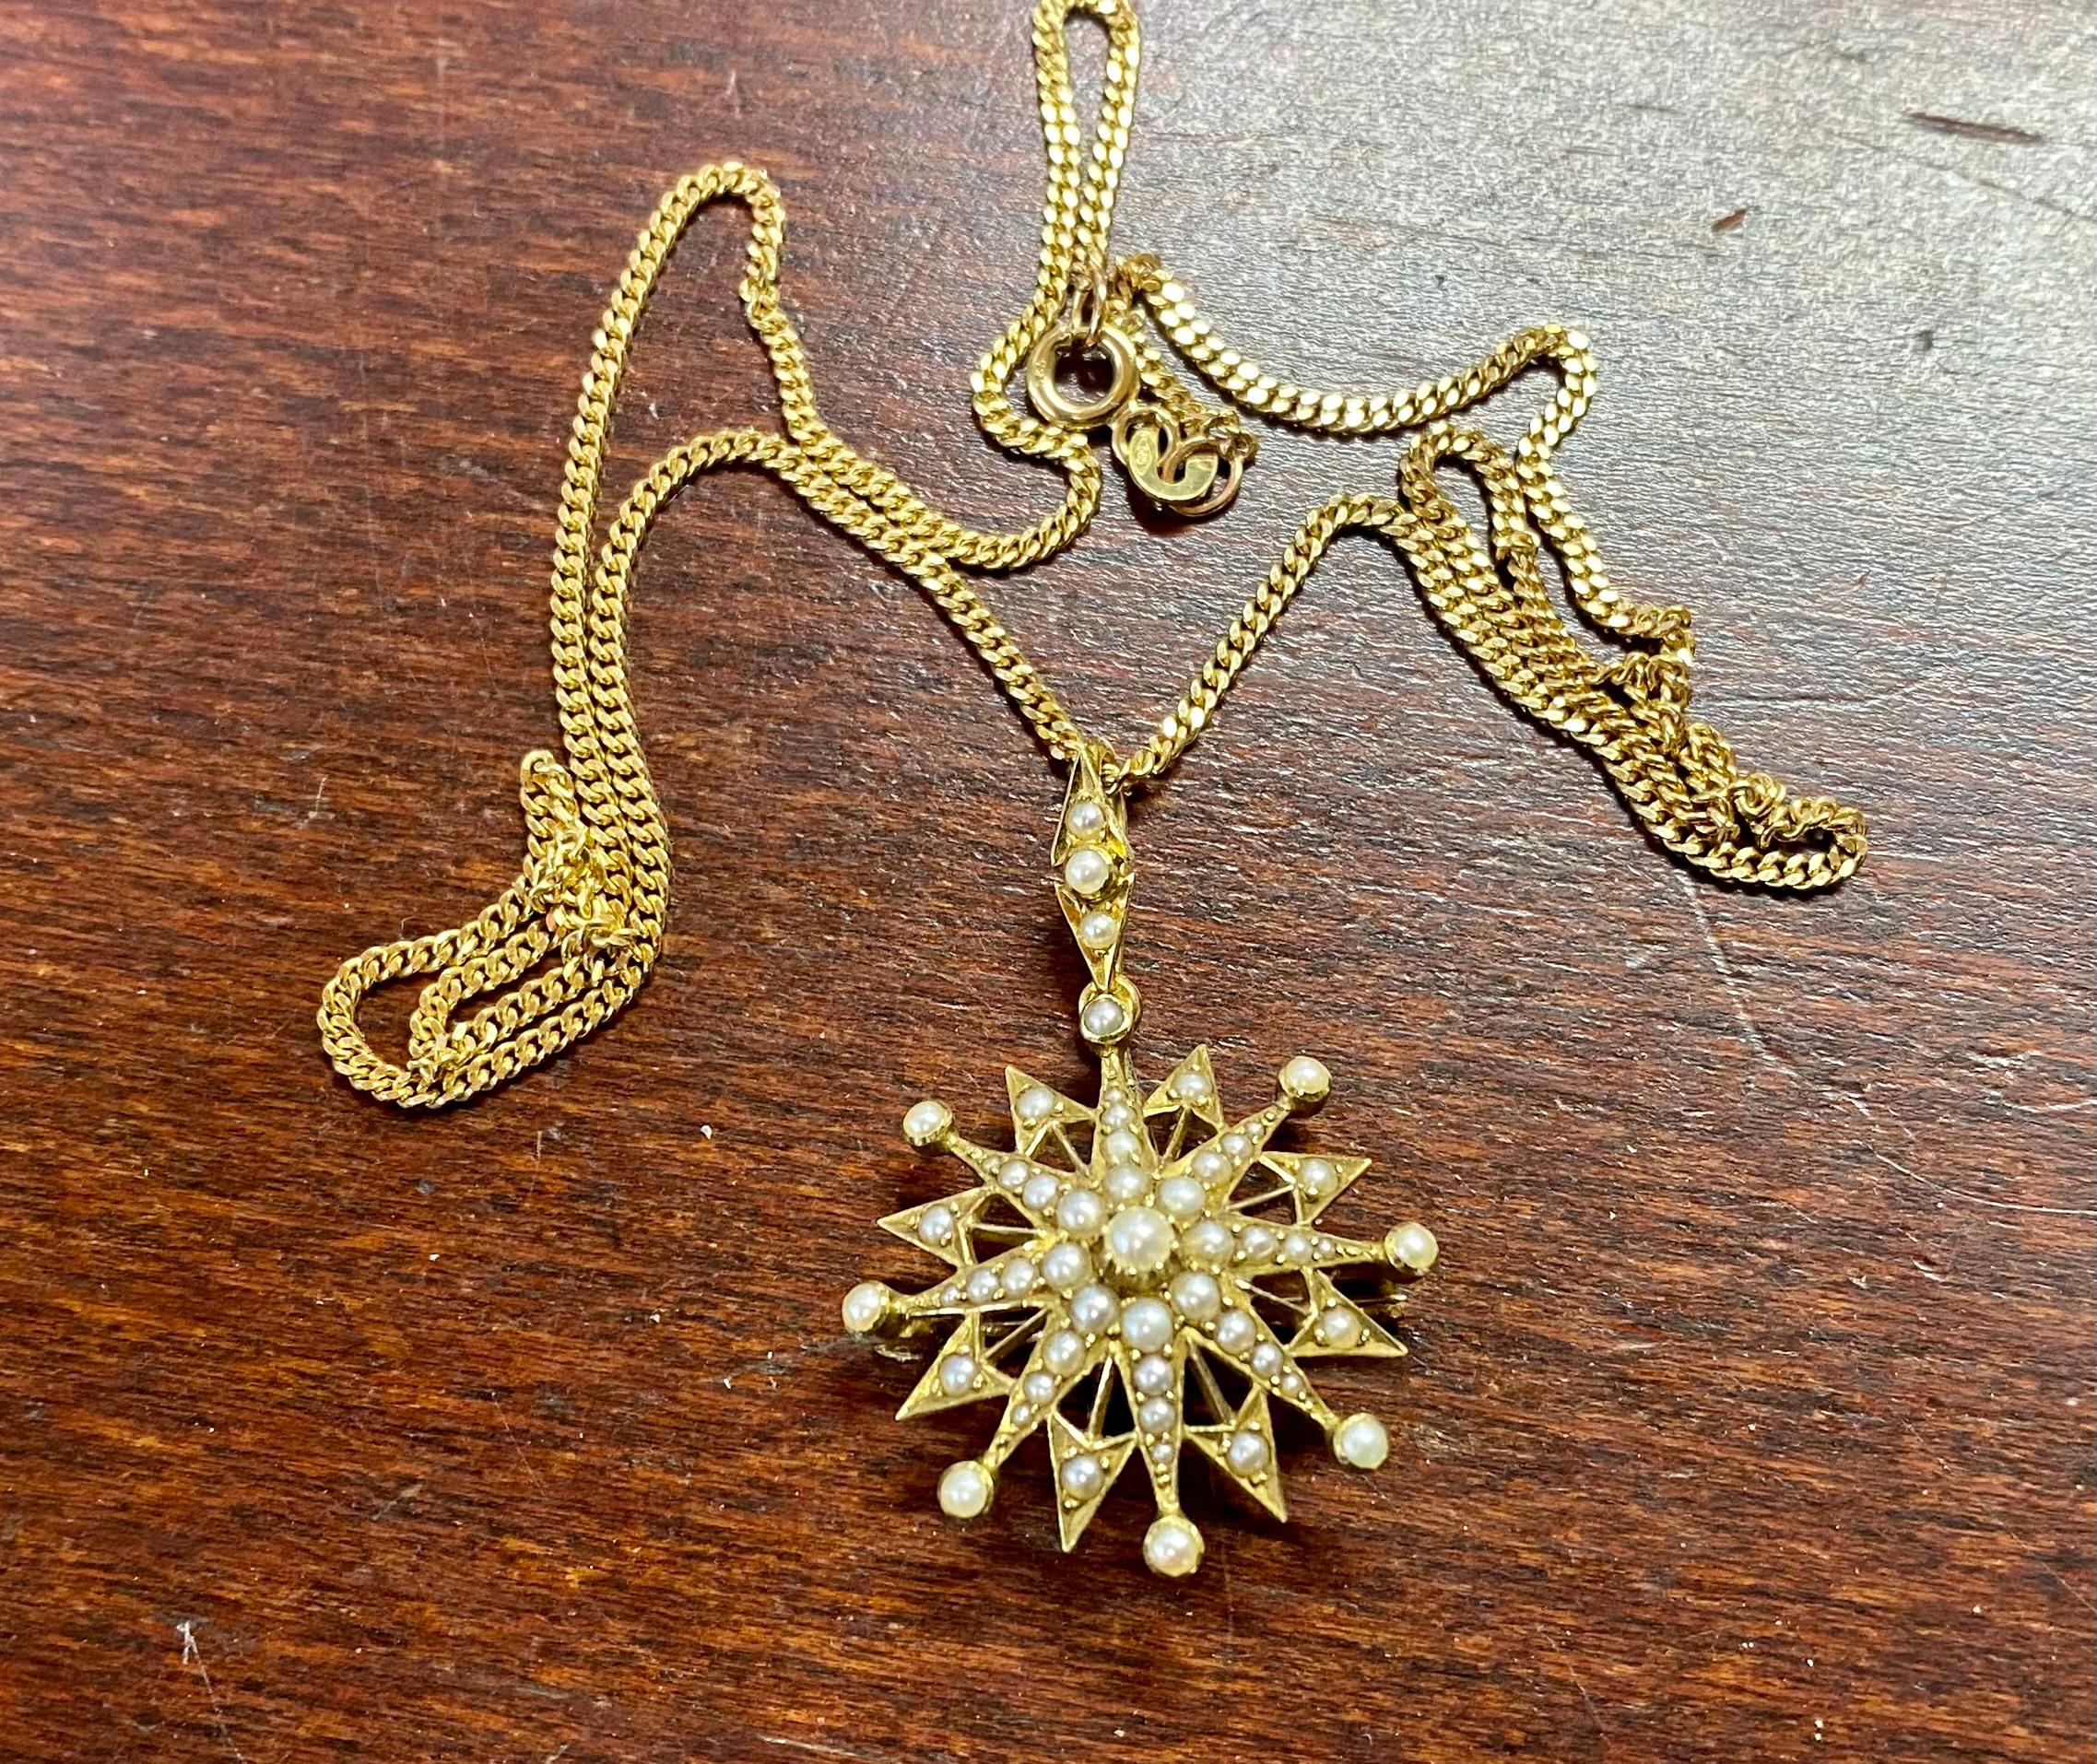 Women's or Men's 14 Karat Gold Star Pendant with Pearls. For Sale